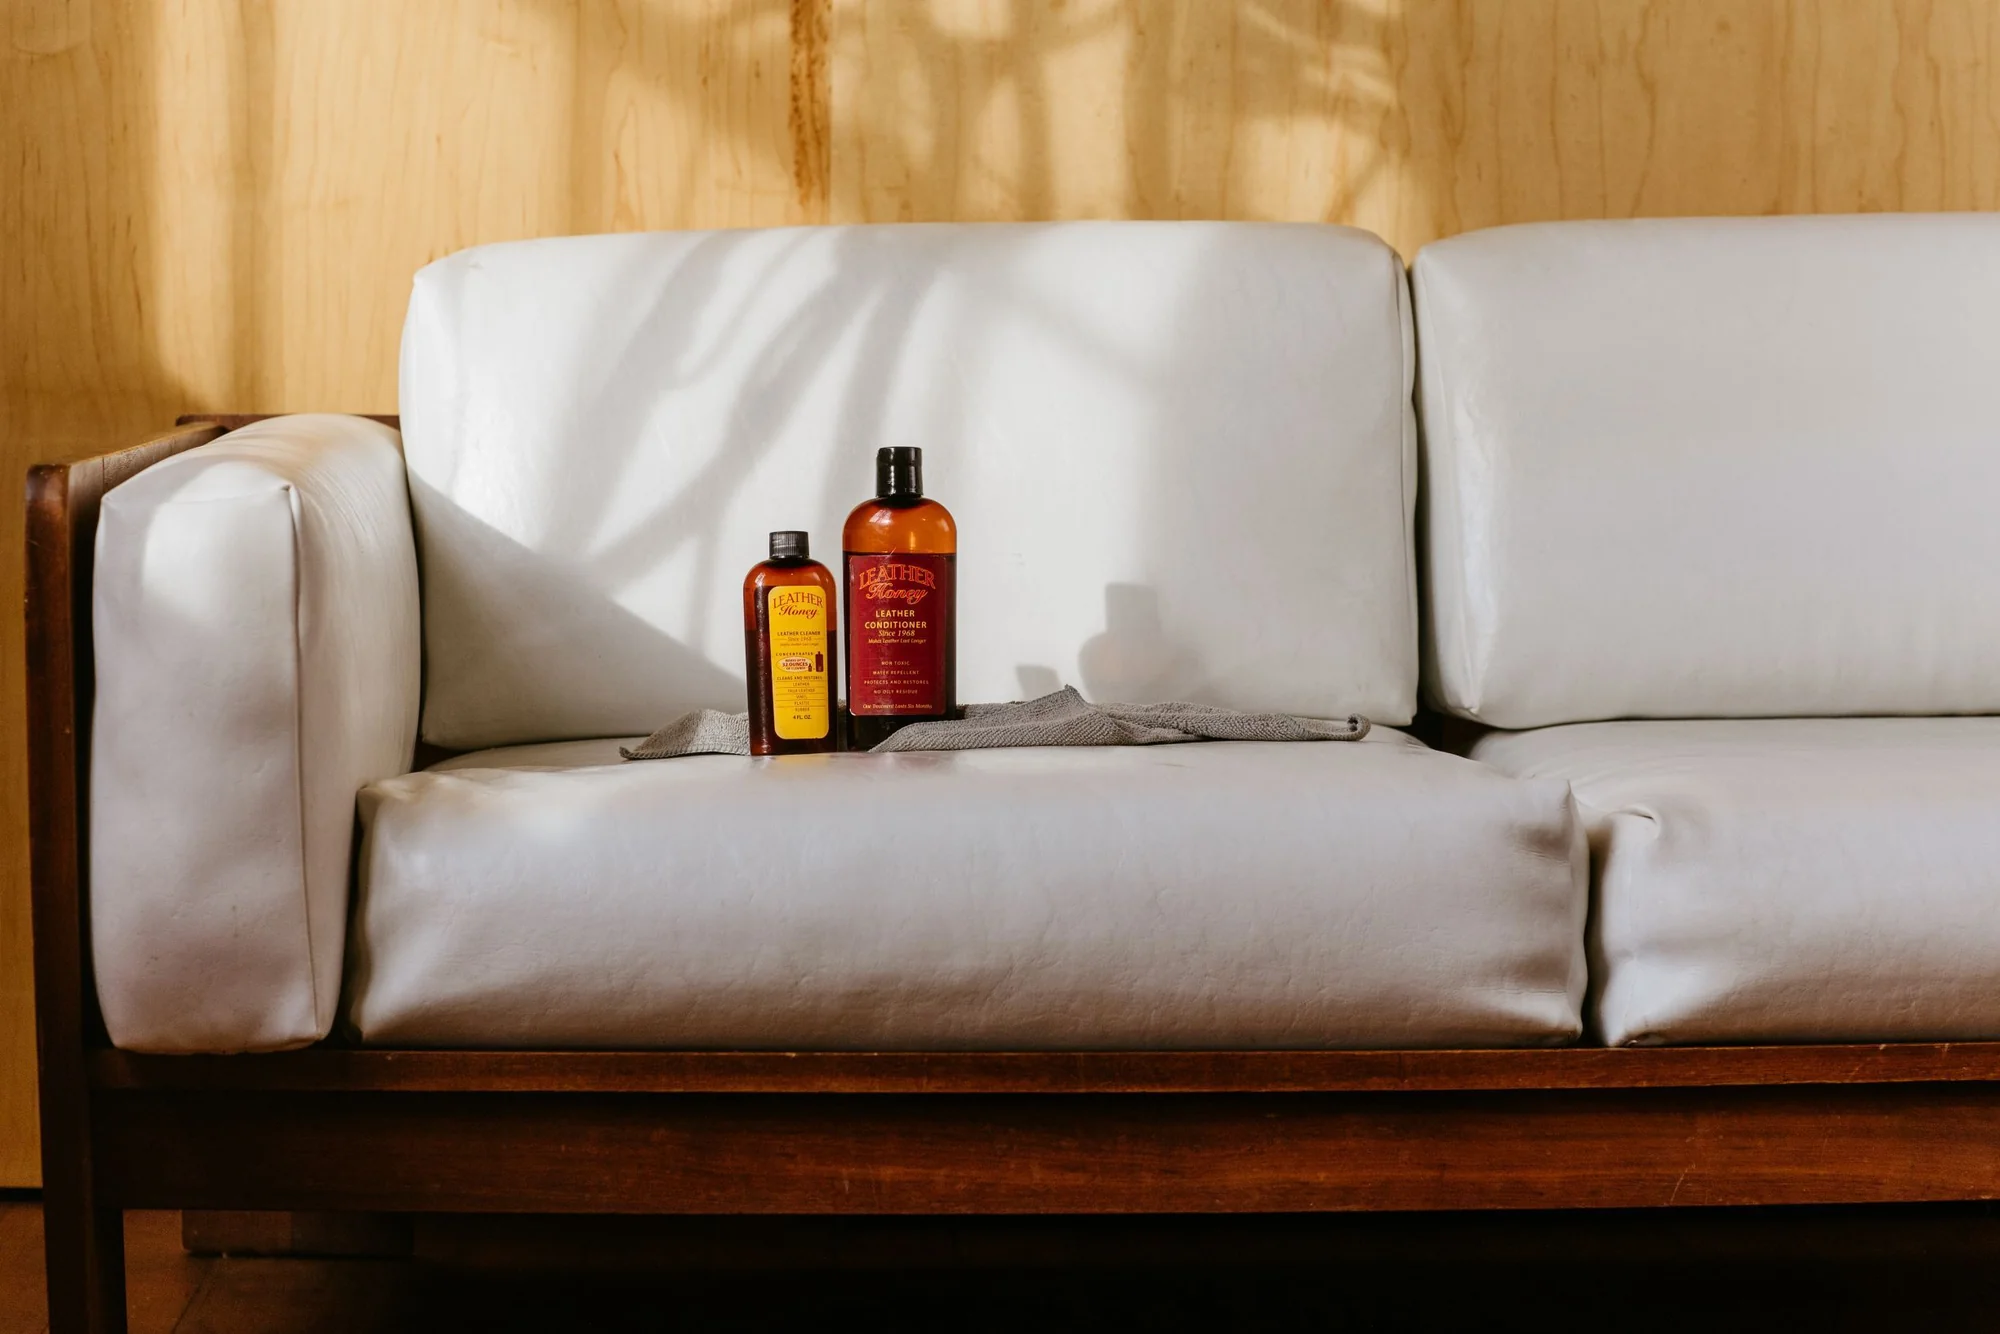 How to Remove Stains on Leather Furniture With Natural Products